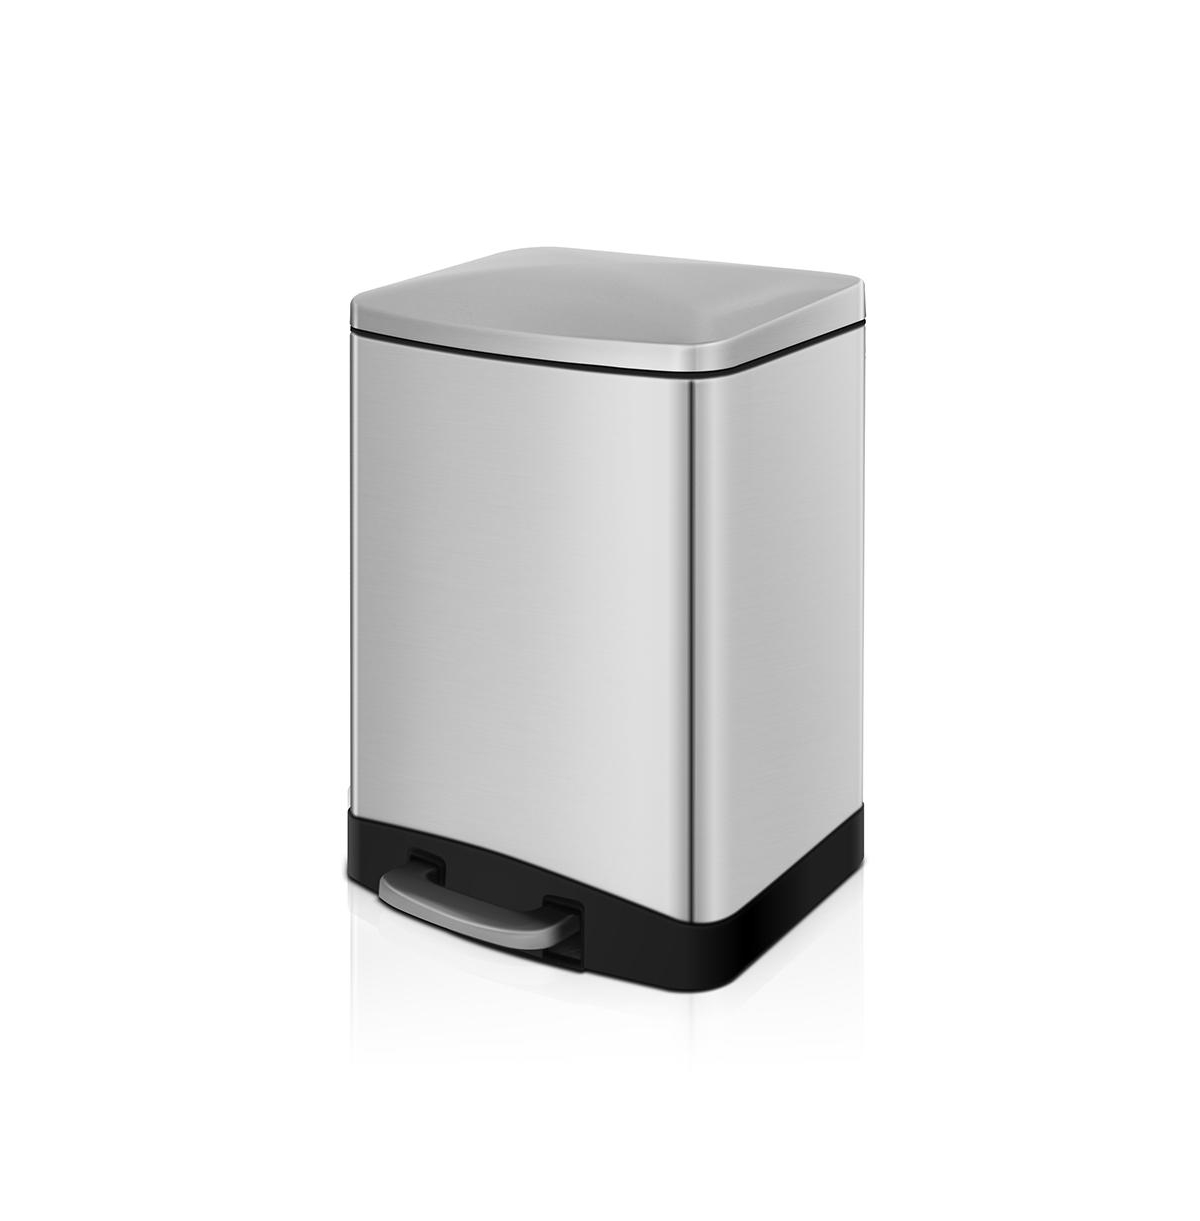 3.2 Gal./12 Liter Stainless Steel Rectangular Step-on Trash Can for Bathroom and Office - Silver